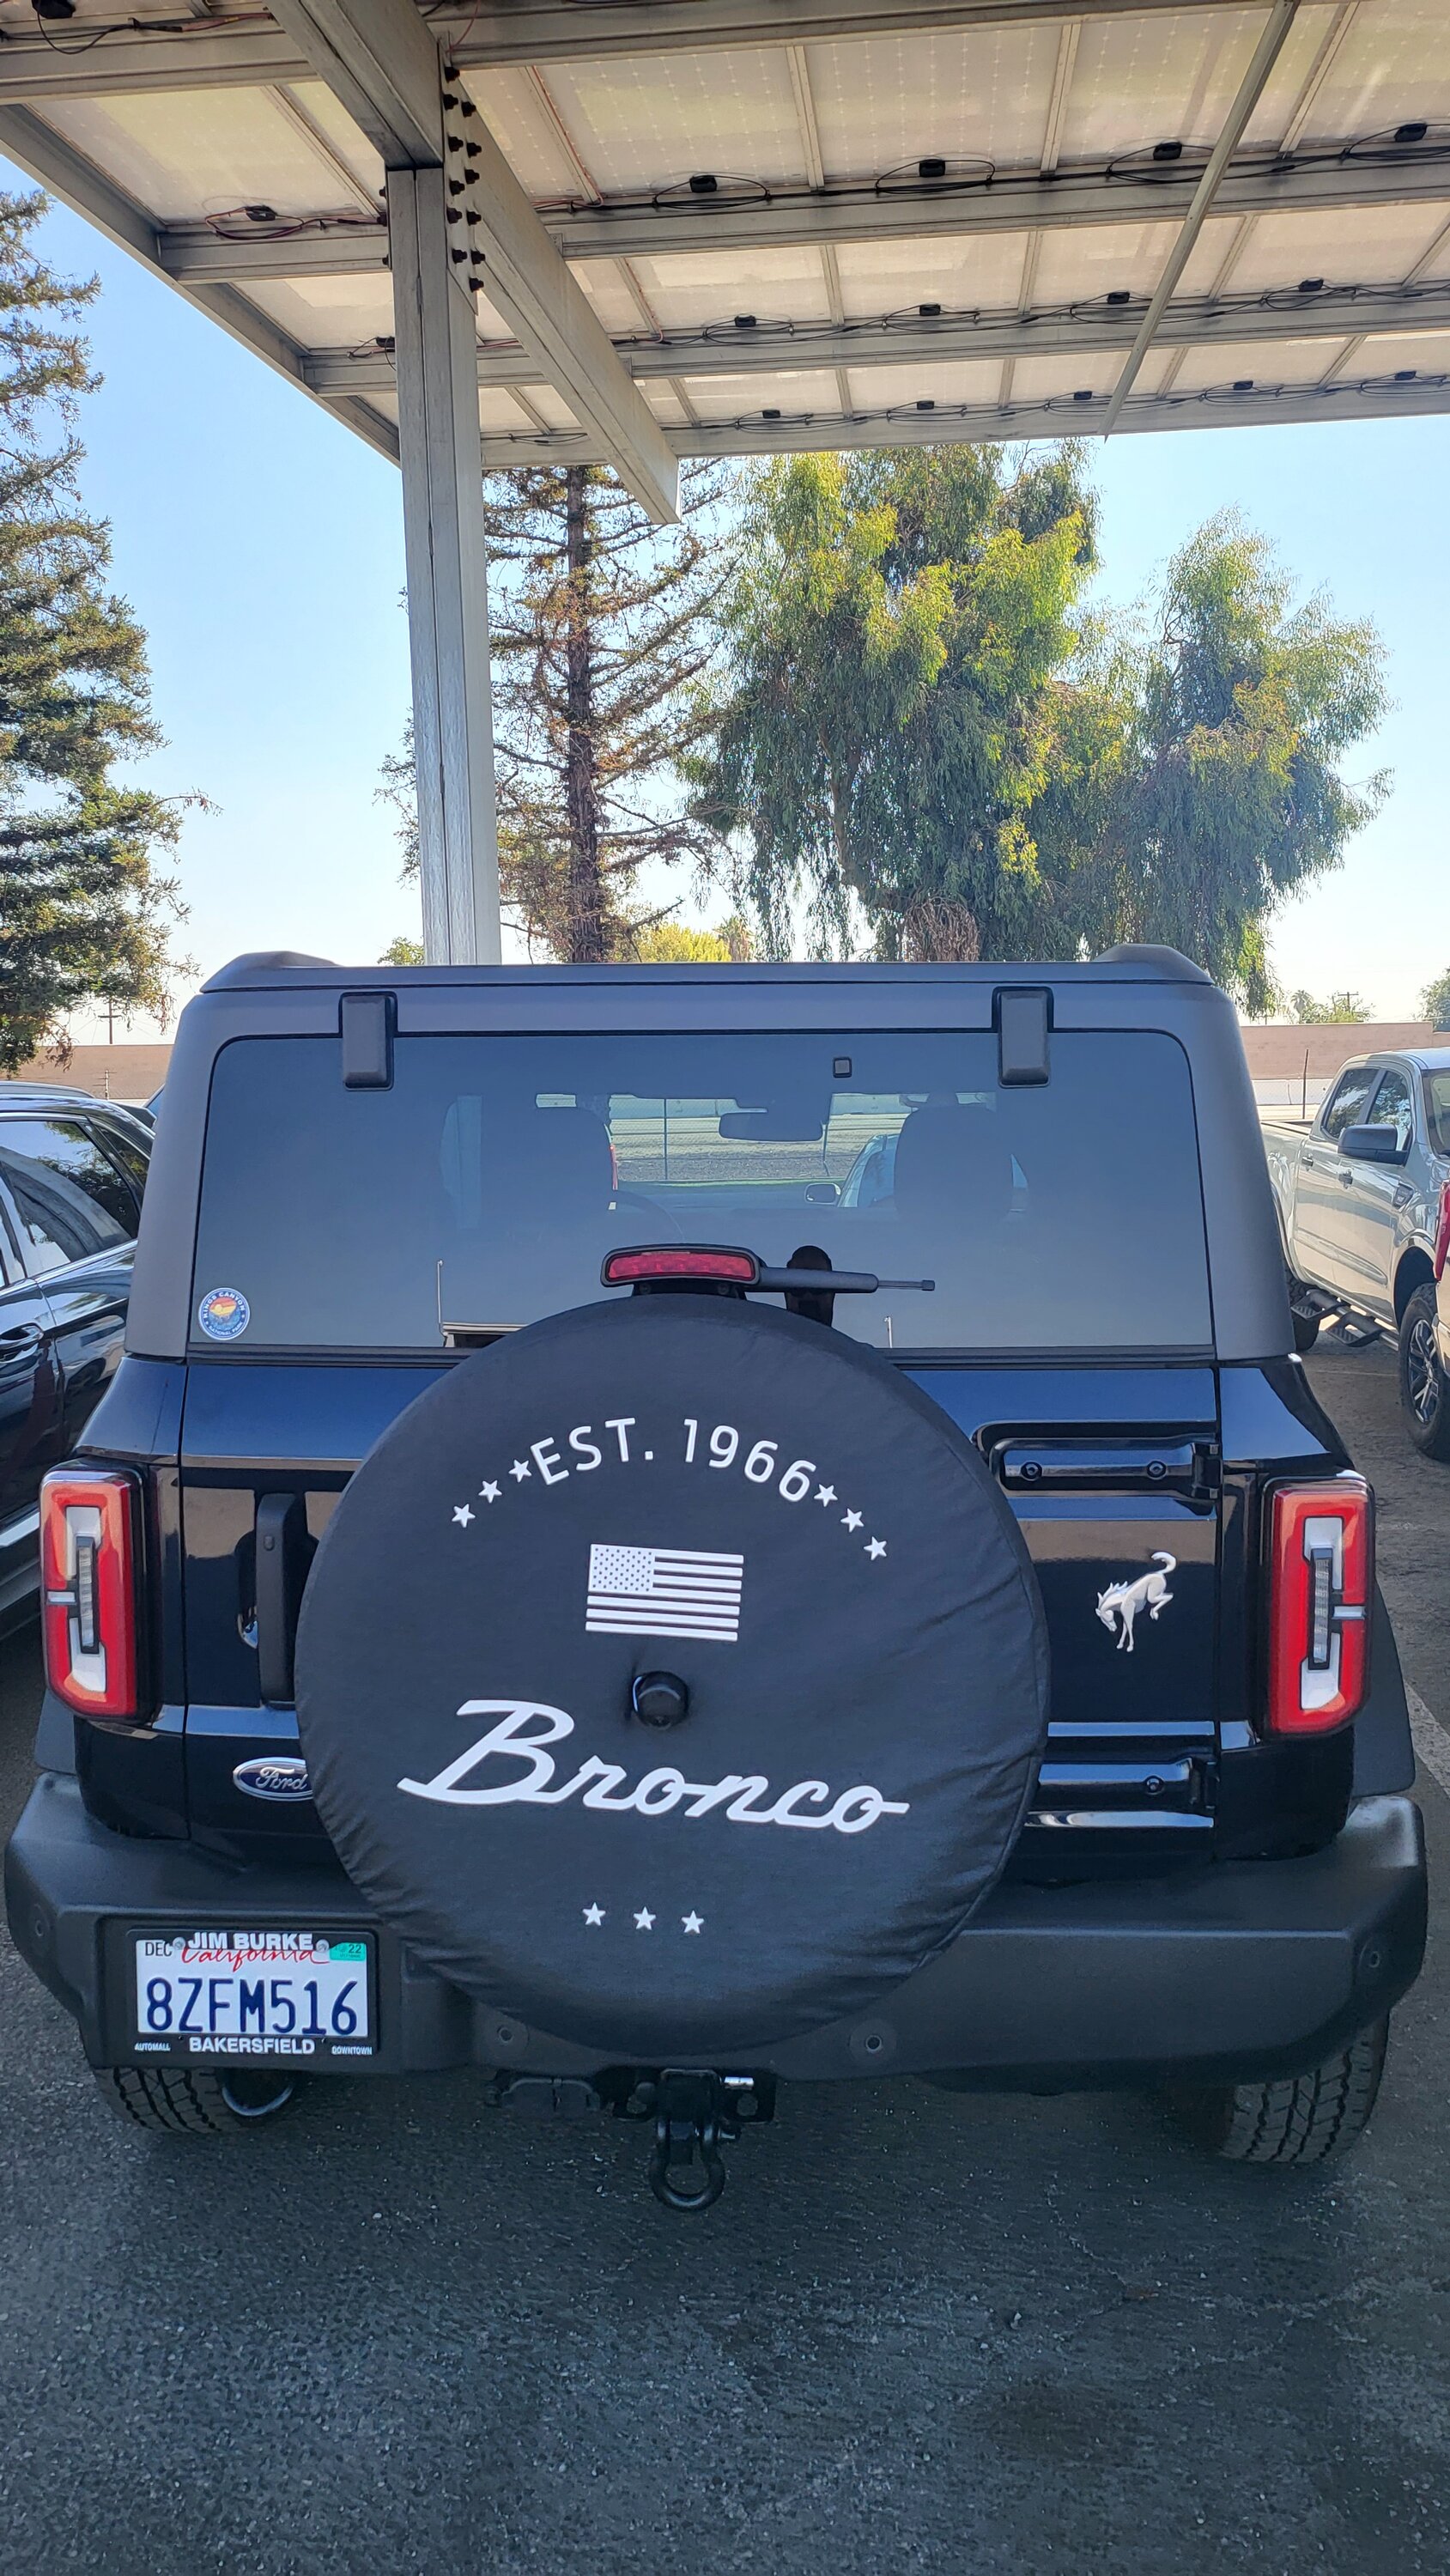 Ford Bronco Spare tire cover or no? 20220819_105624